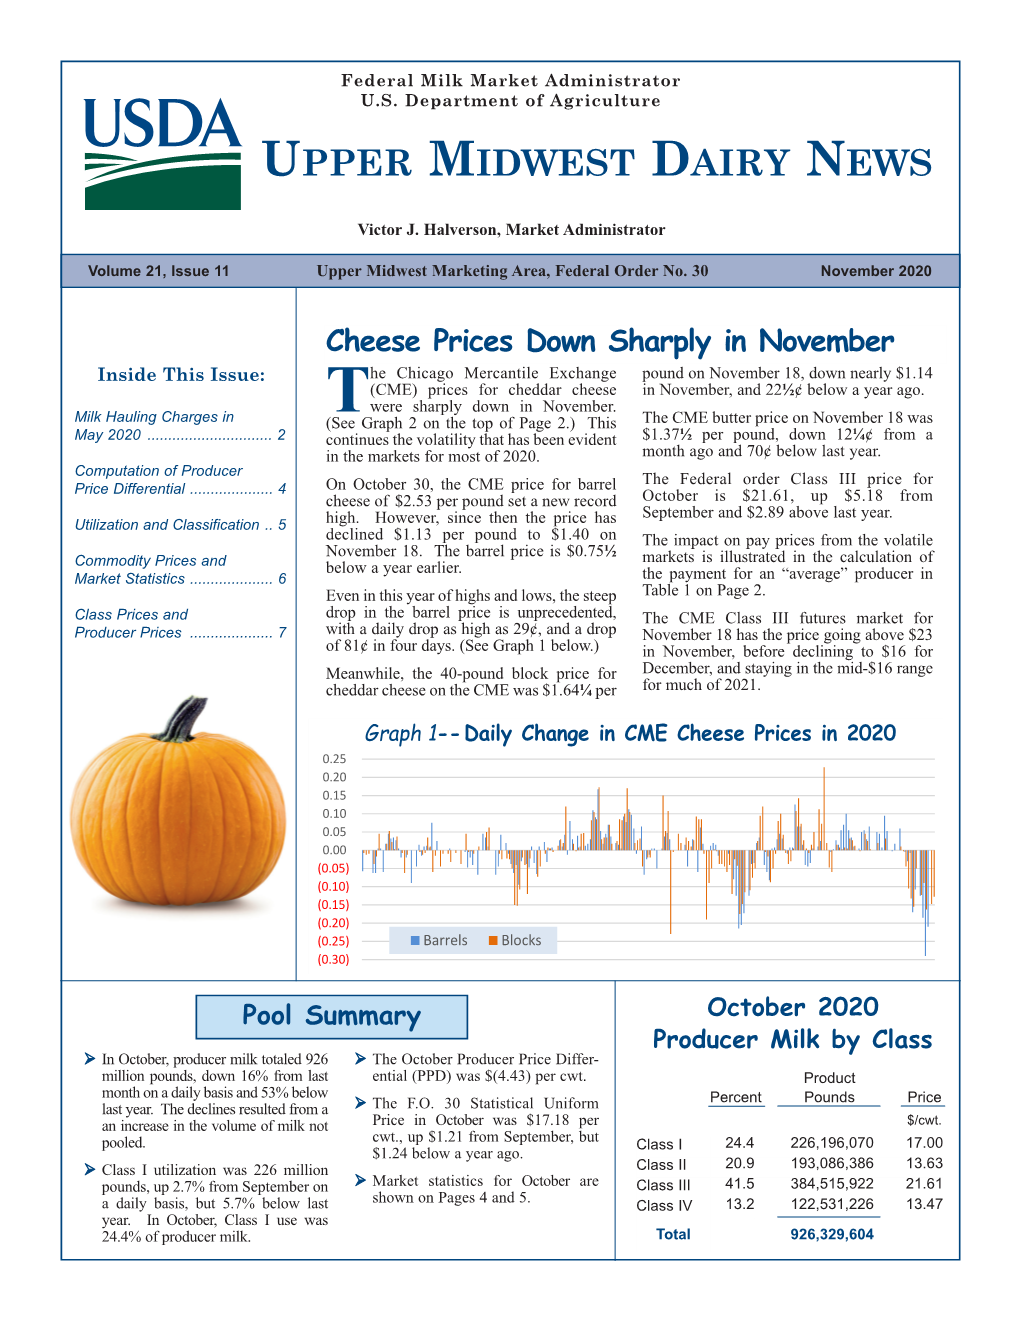 Upper Midwest Dairy News